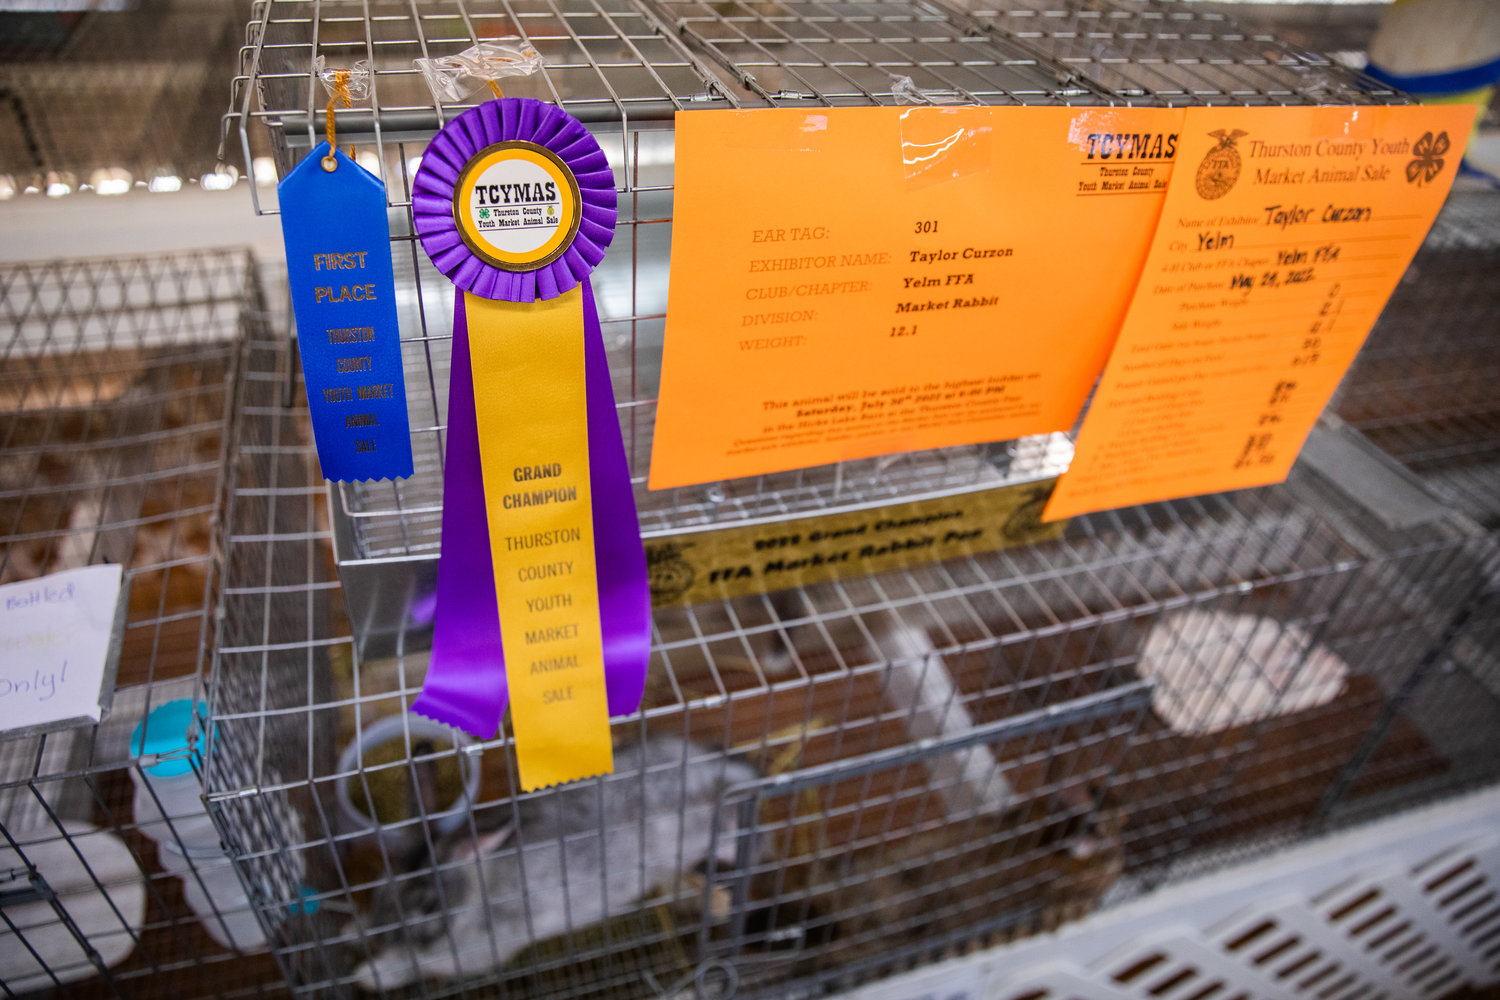 Taylor Curzon, of Yelm, displays First Place and Grand Champion ribbons for rabbits in the Thurston County Youth Market Animal Sale Thursday, July 28 in Lacey.